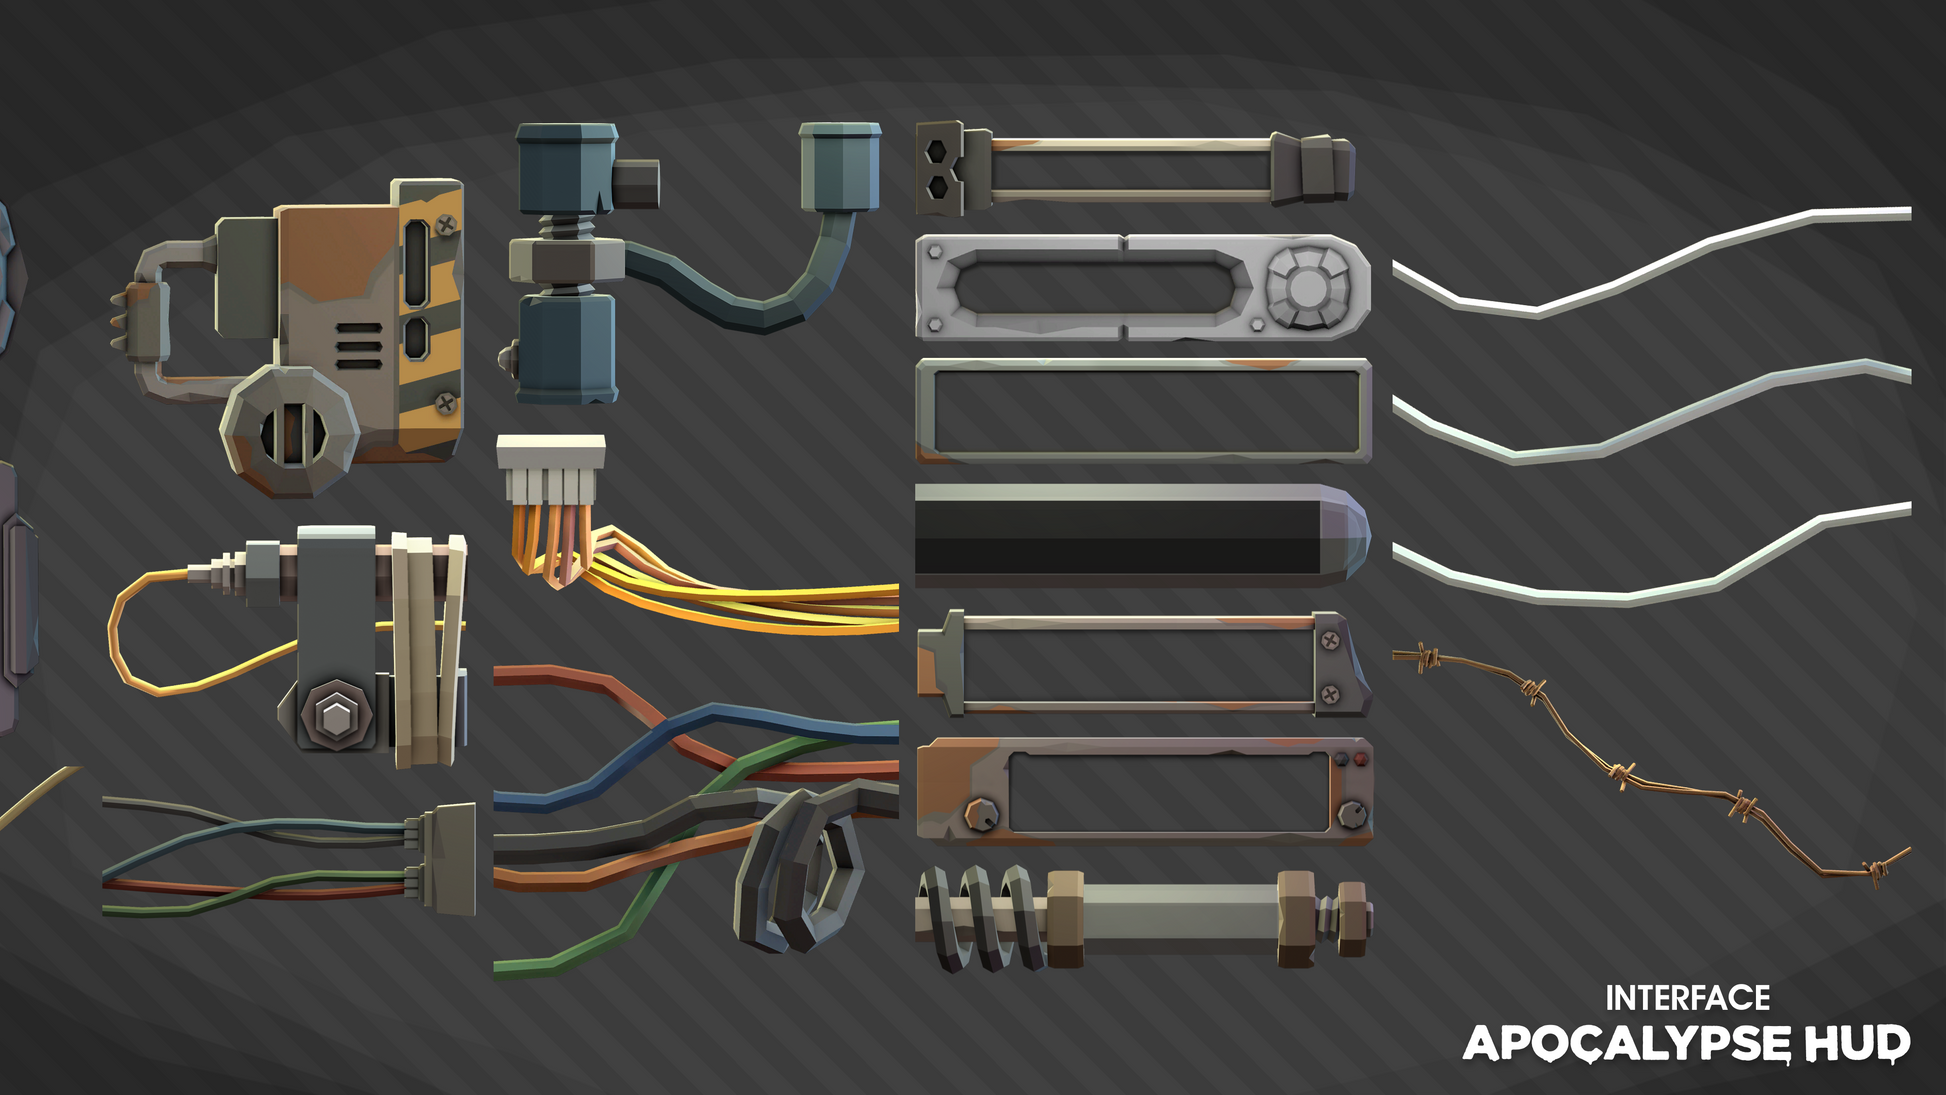 INTERFACE Apocalypse HUD UI asset pack displaying wire and conductor part sprites for game design